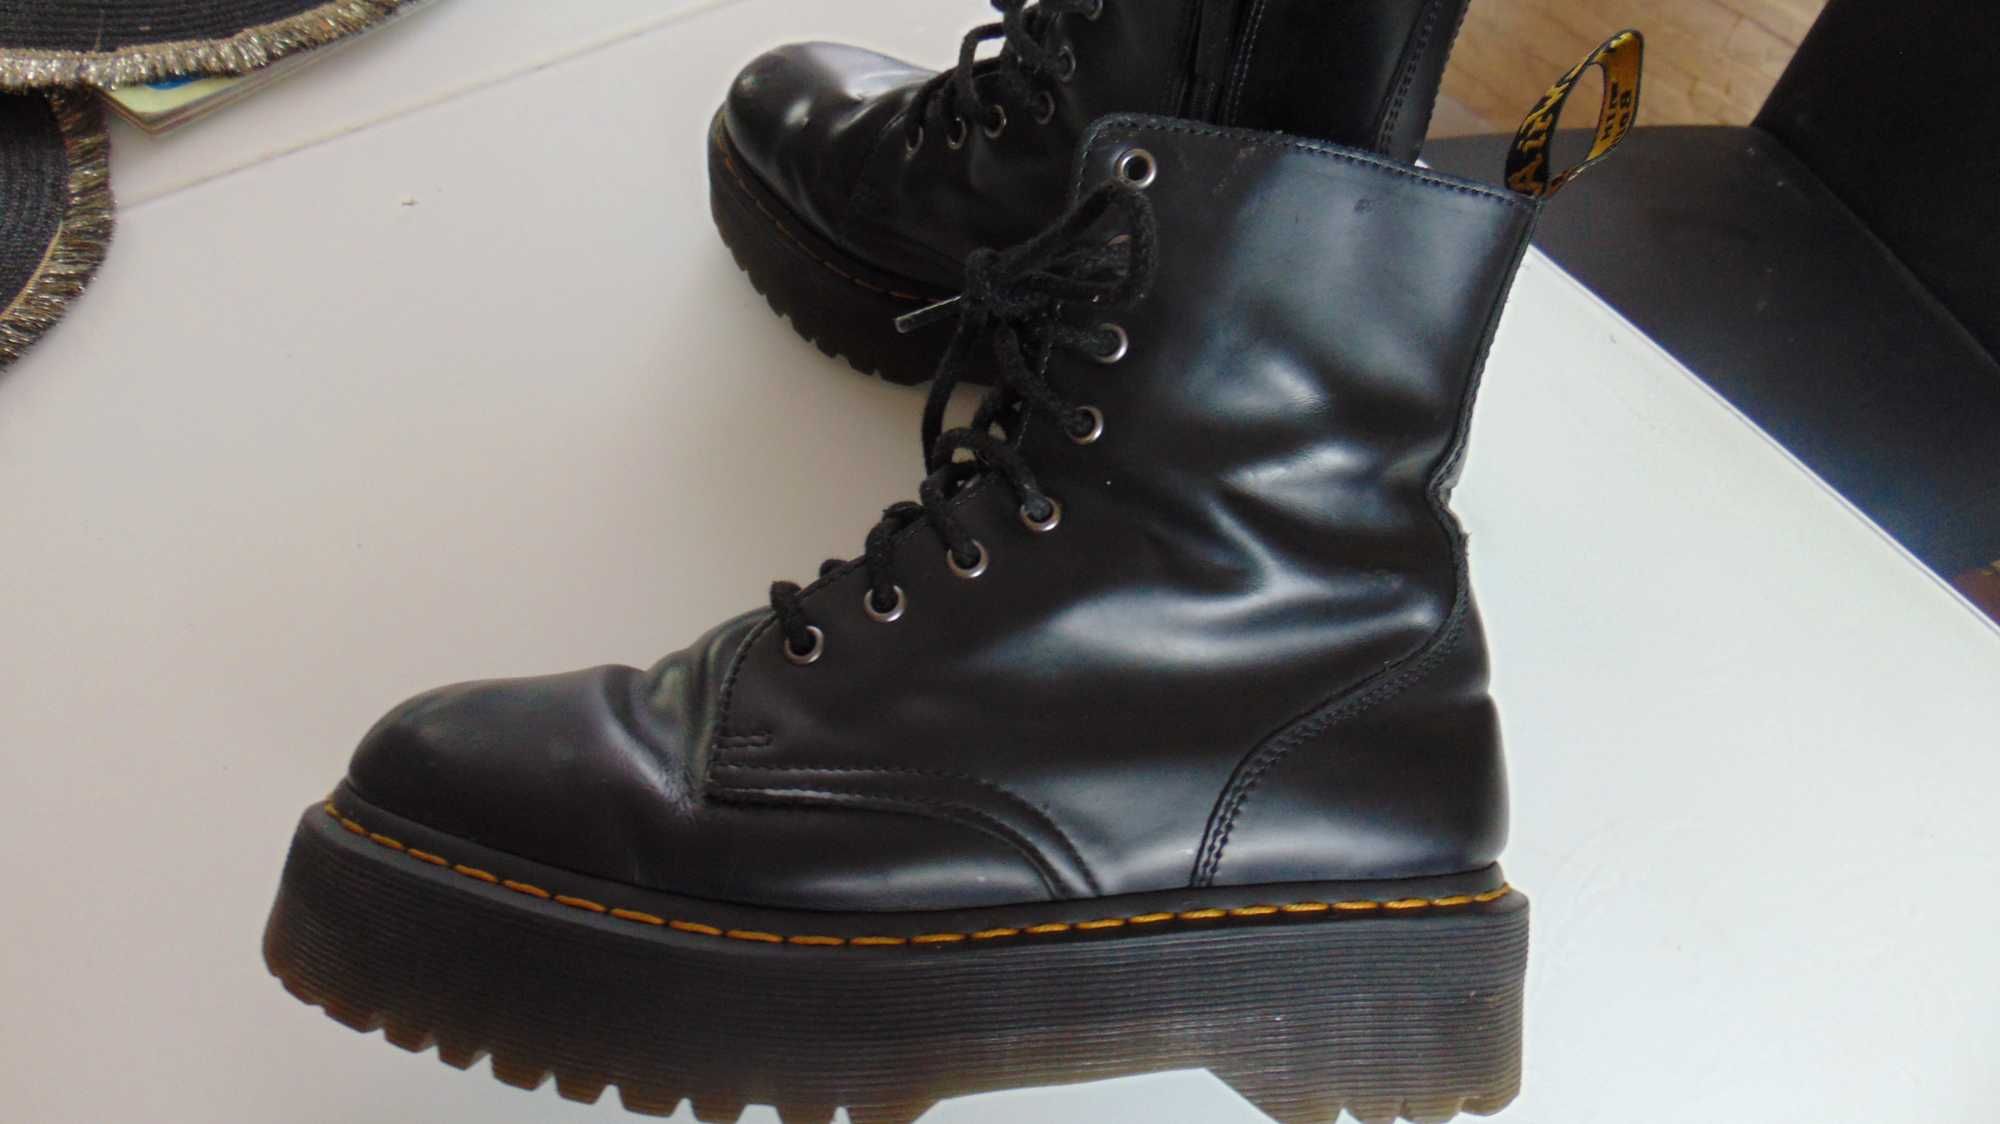 Dr,martens glany roz 42